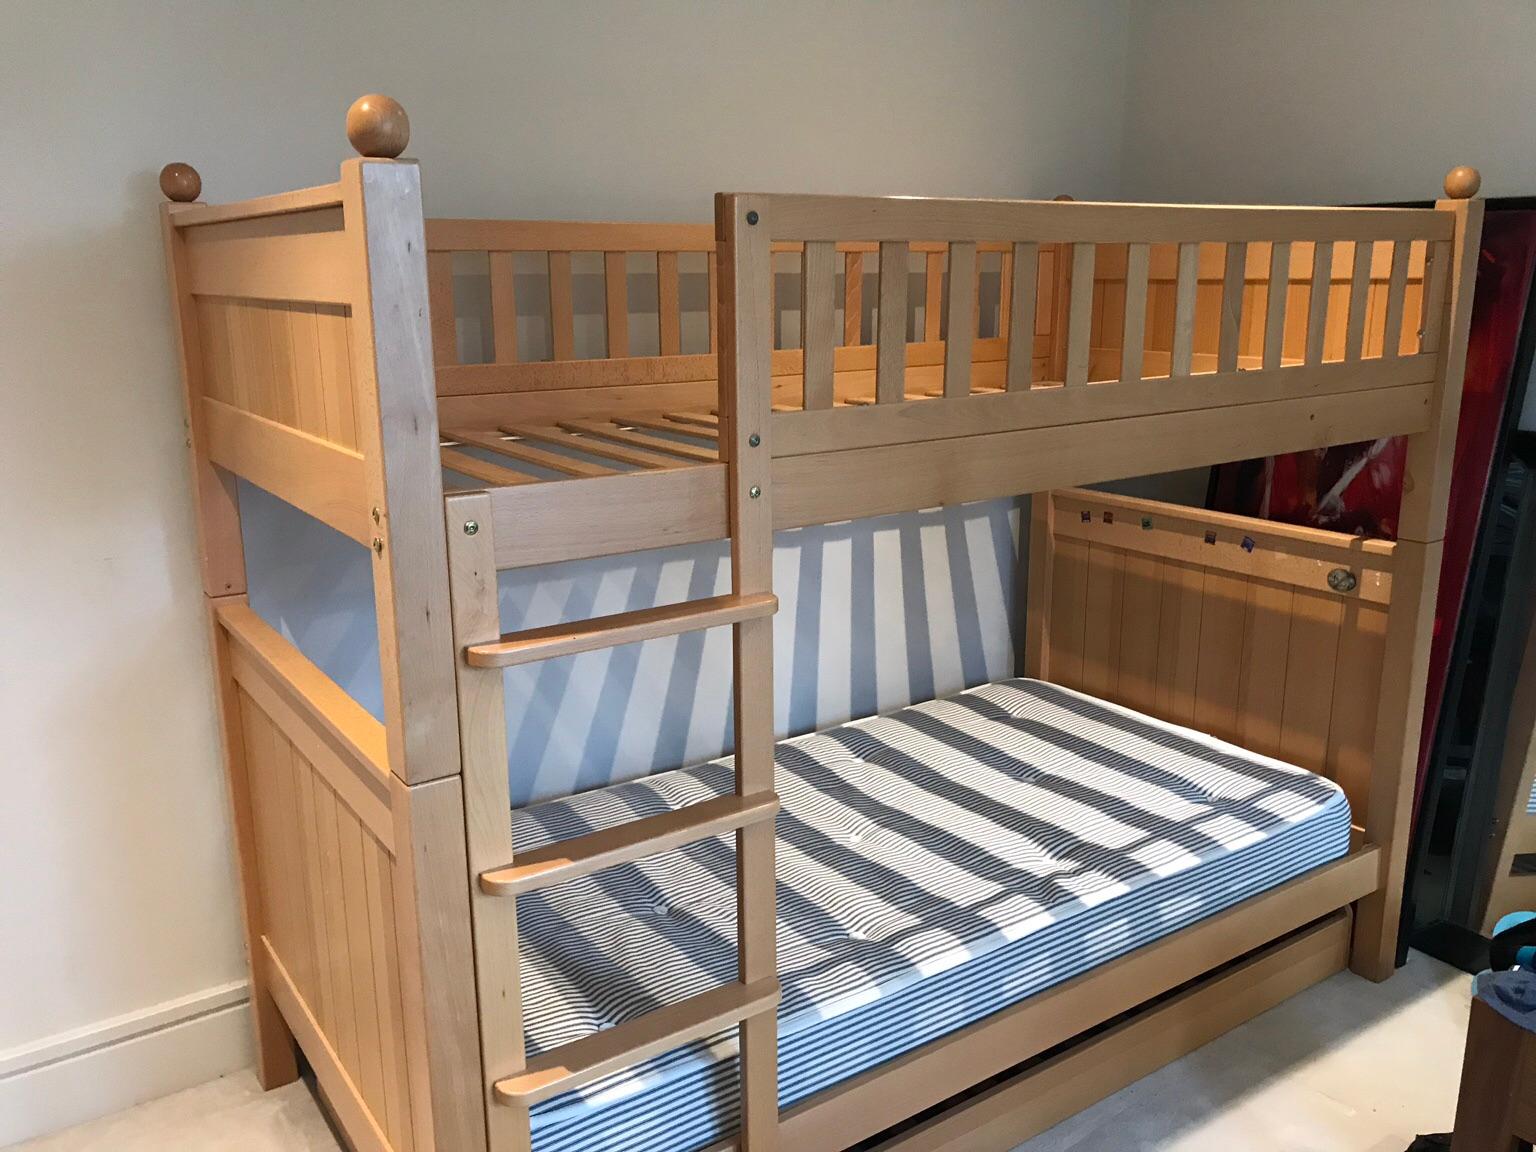 Aspace Bunk Beds With Truckle Bed In, Aspace Bunk Bed